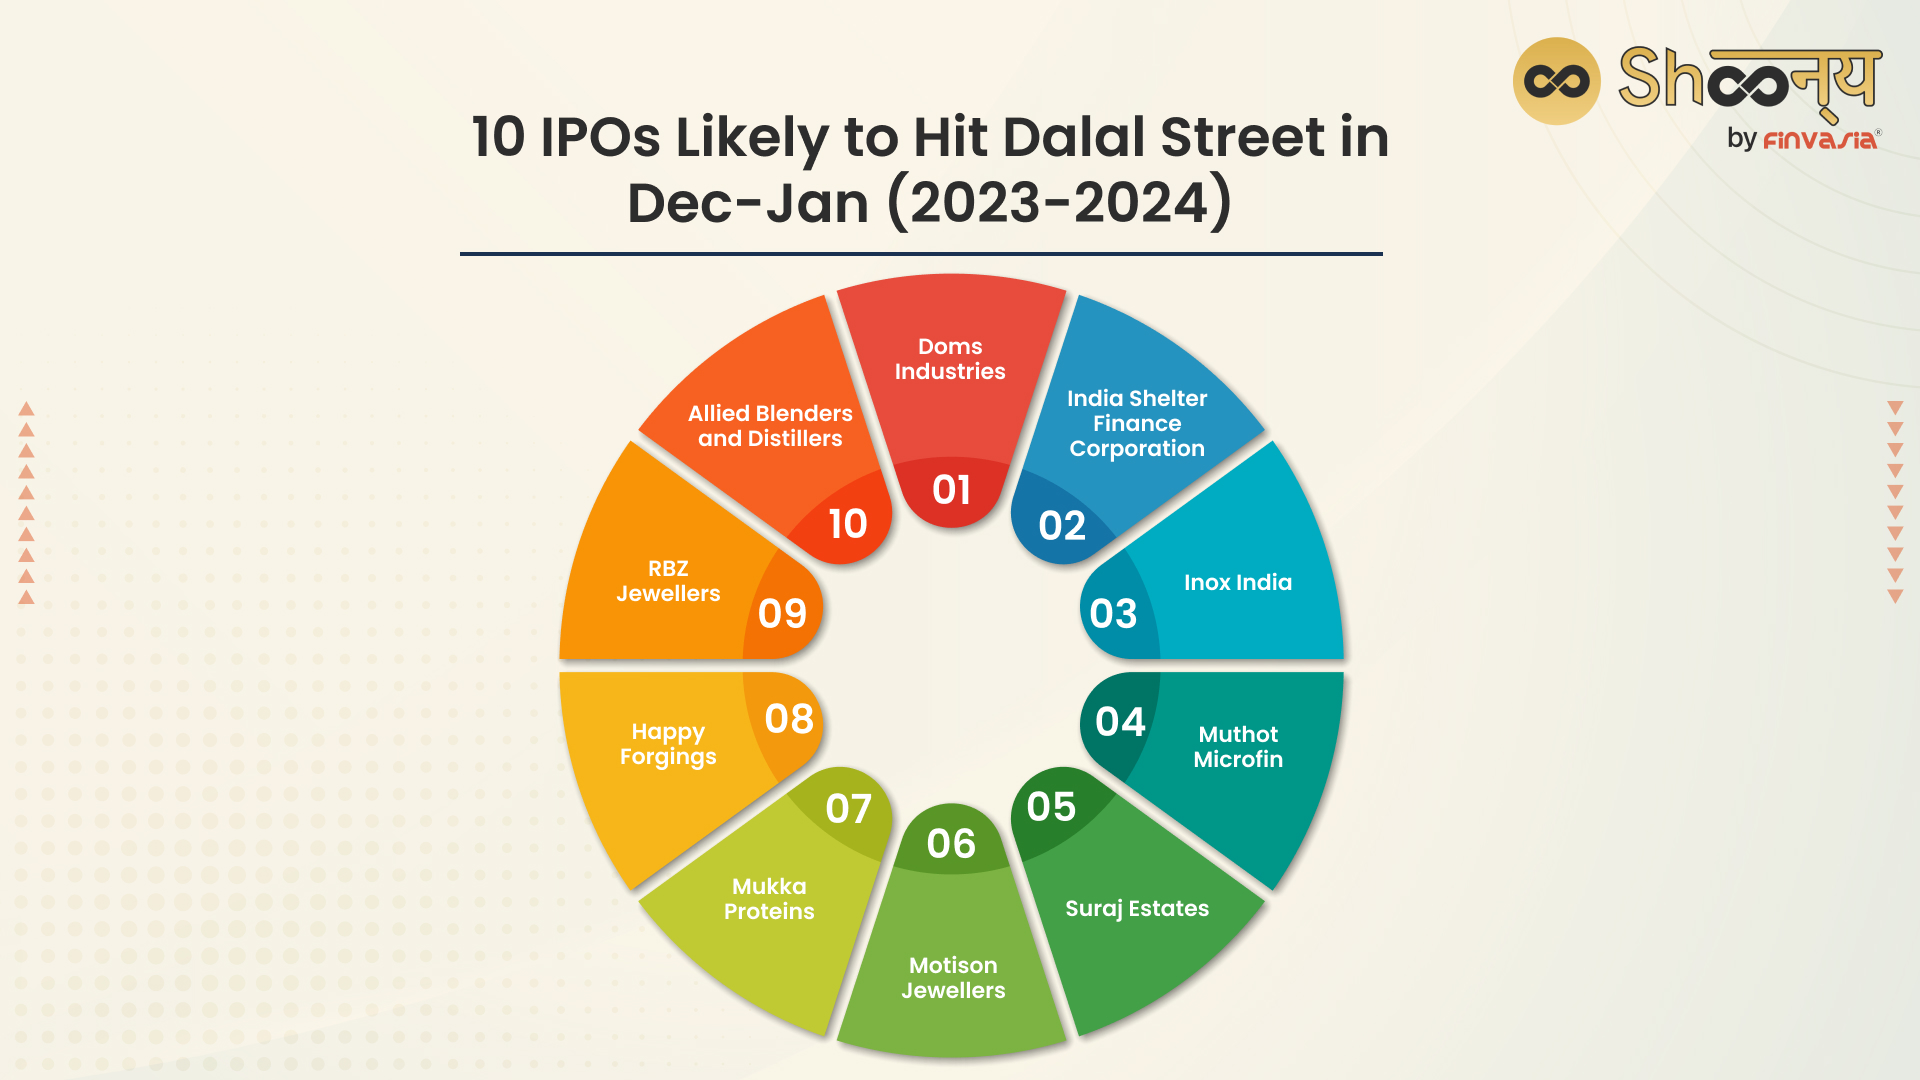 10 IPOs Likely to Hit Dalal Street in Dec-Jan (2023-2024) 
